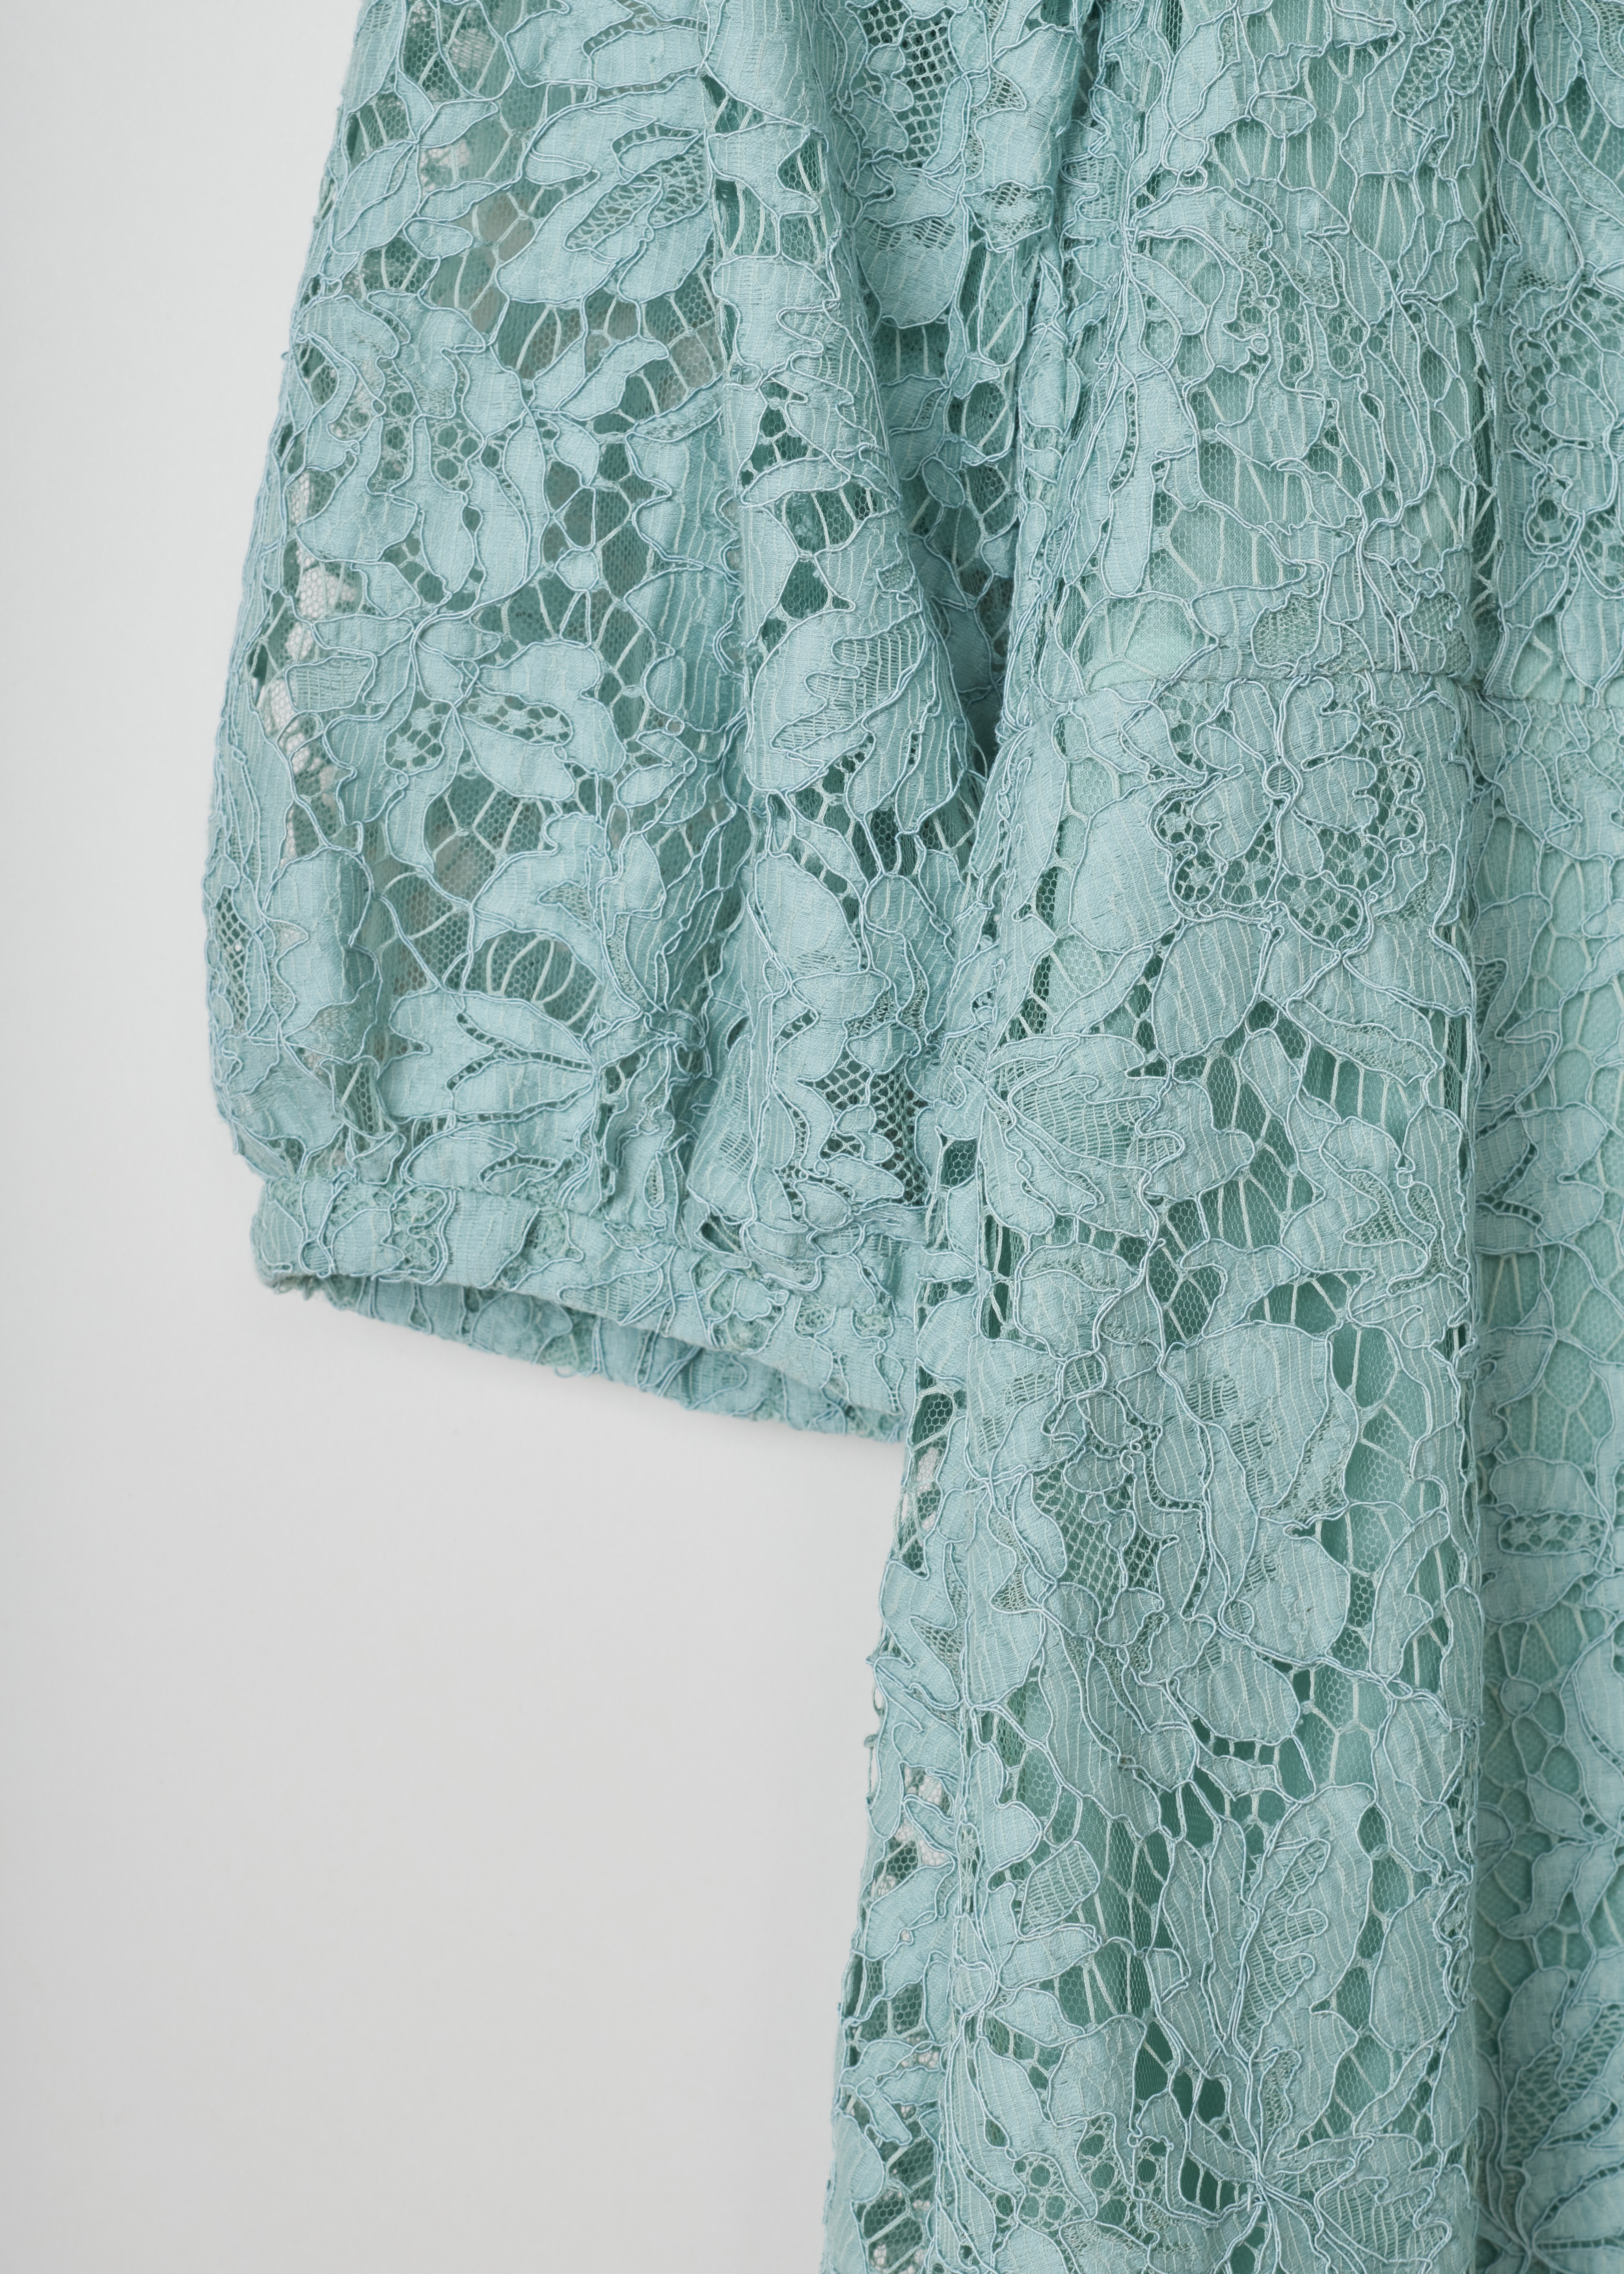 Valentino pastel green long sleeve lace dress RB0VALH71EC_5W0 light blue detail. Pastel green dress in cotton lace, bishop sleeves, a fitted bodice with a close-fit neckline, an a-line skirt, scalloped hems and an invisible zip fastening on the back.